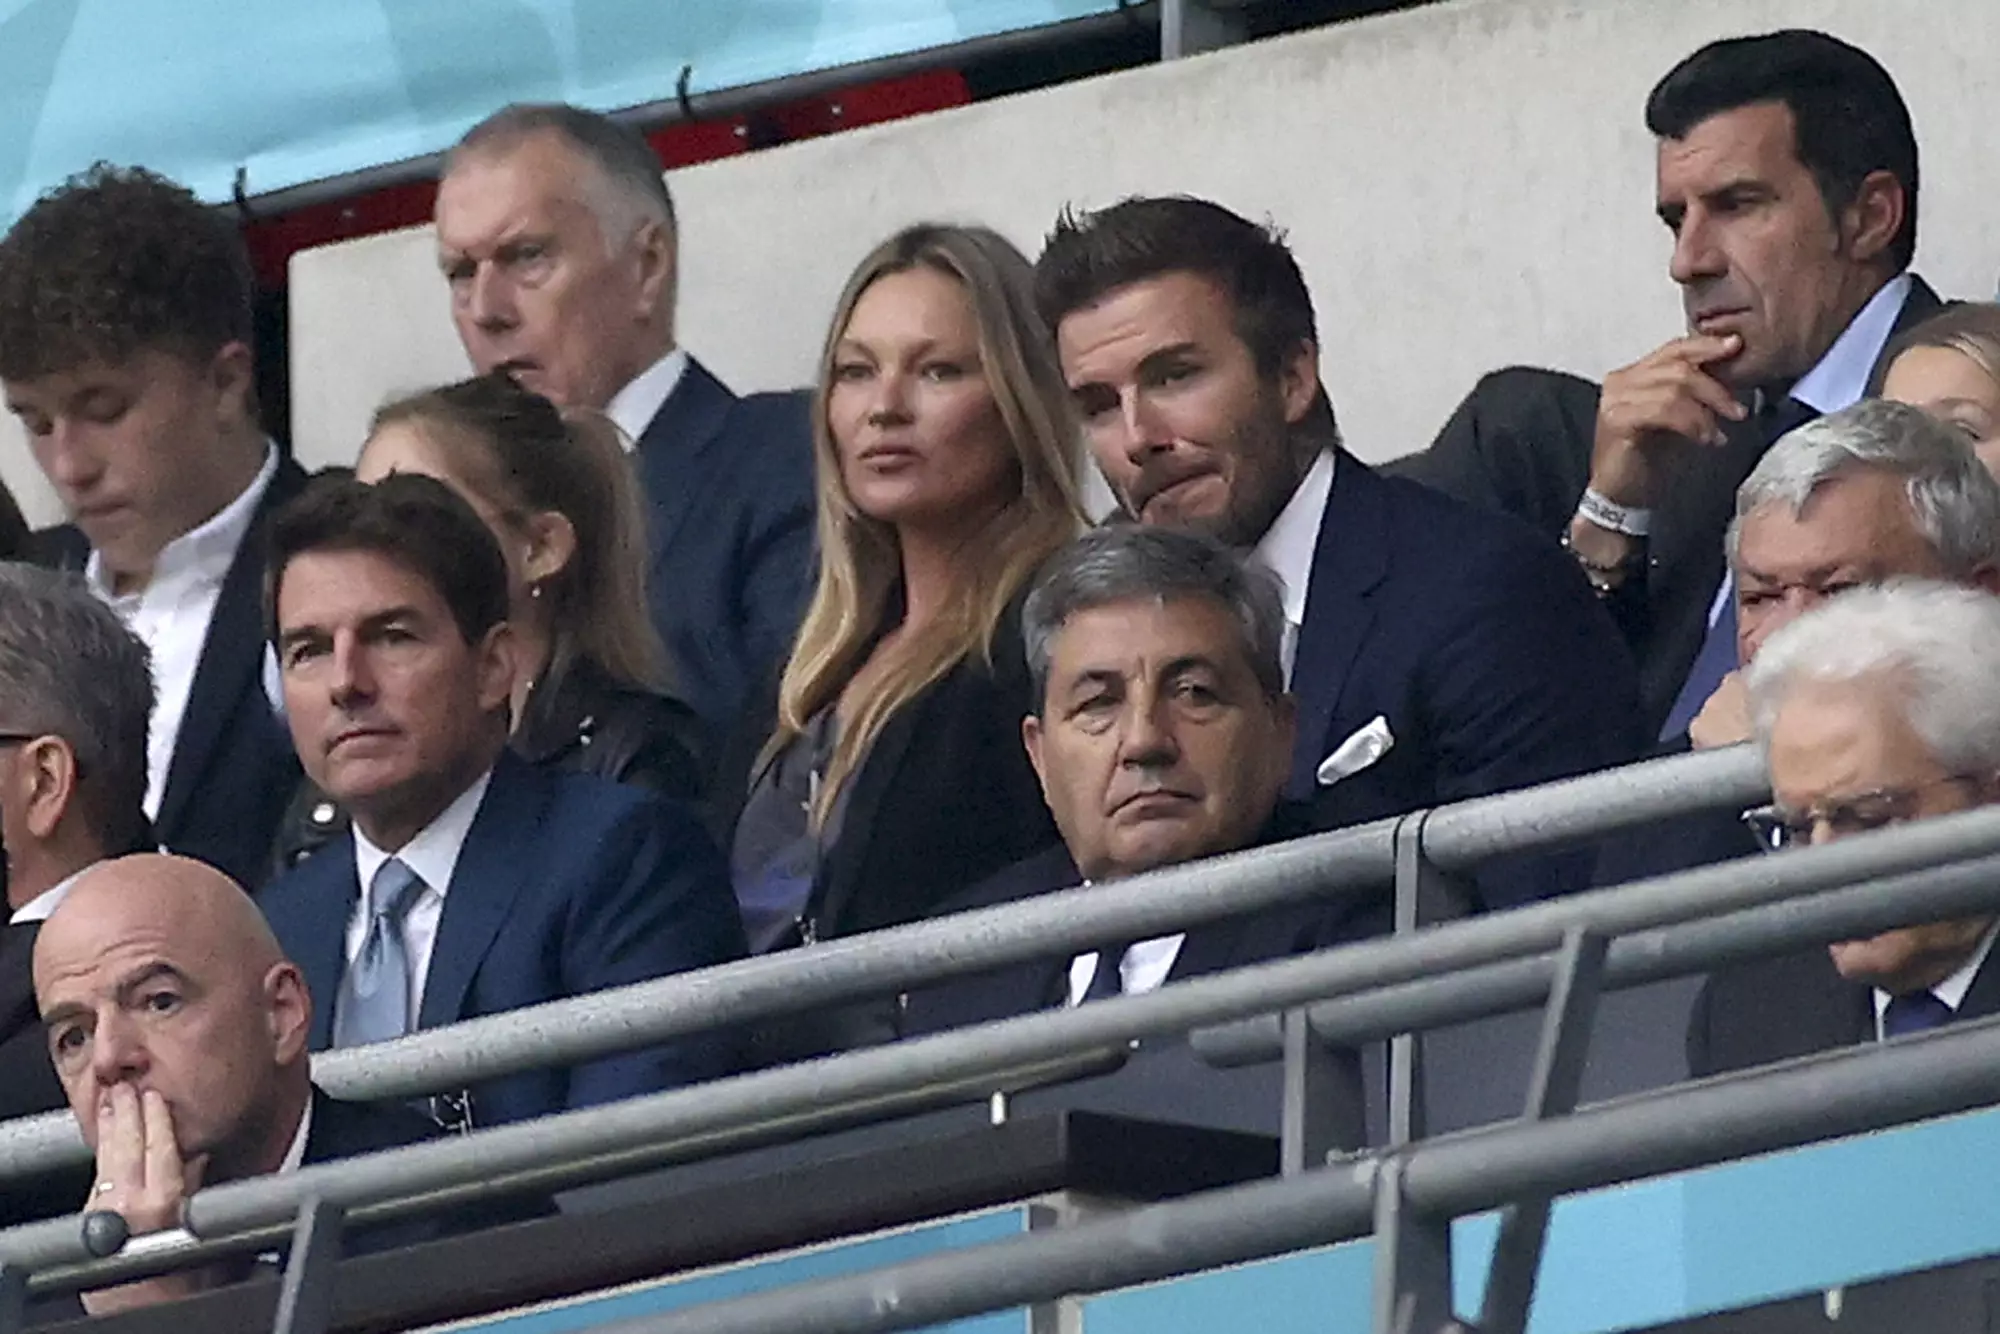 Tom Cruise finished off a packed Sunday with the Euro 2020 final.